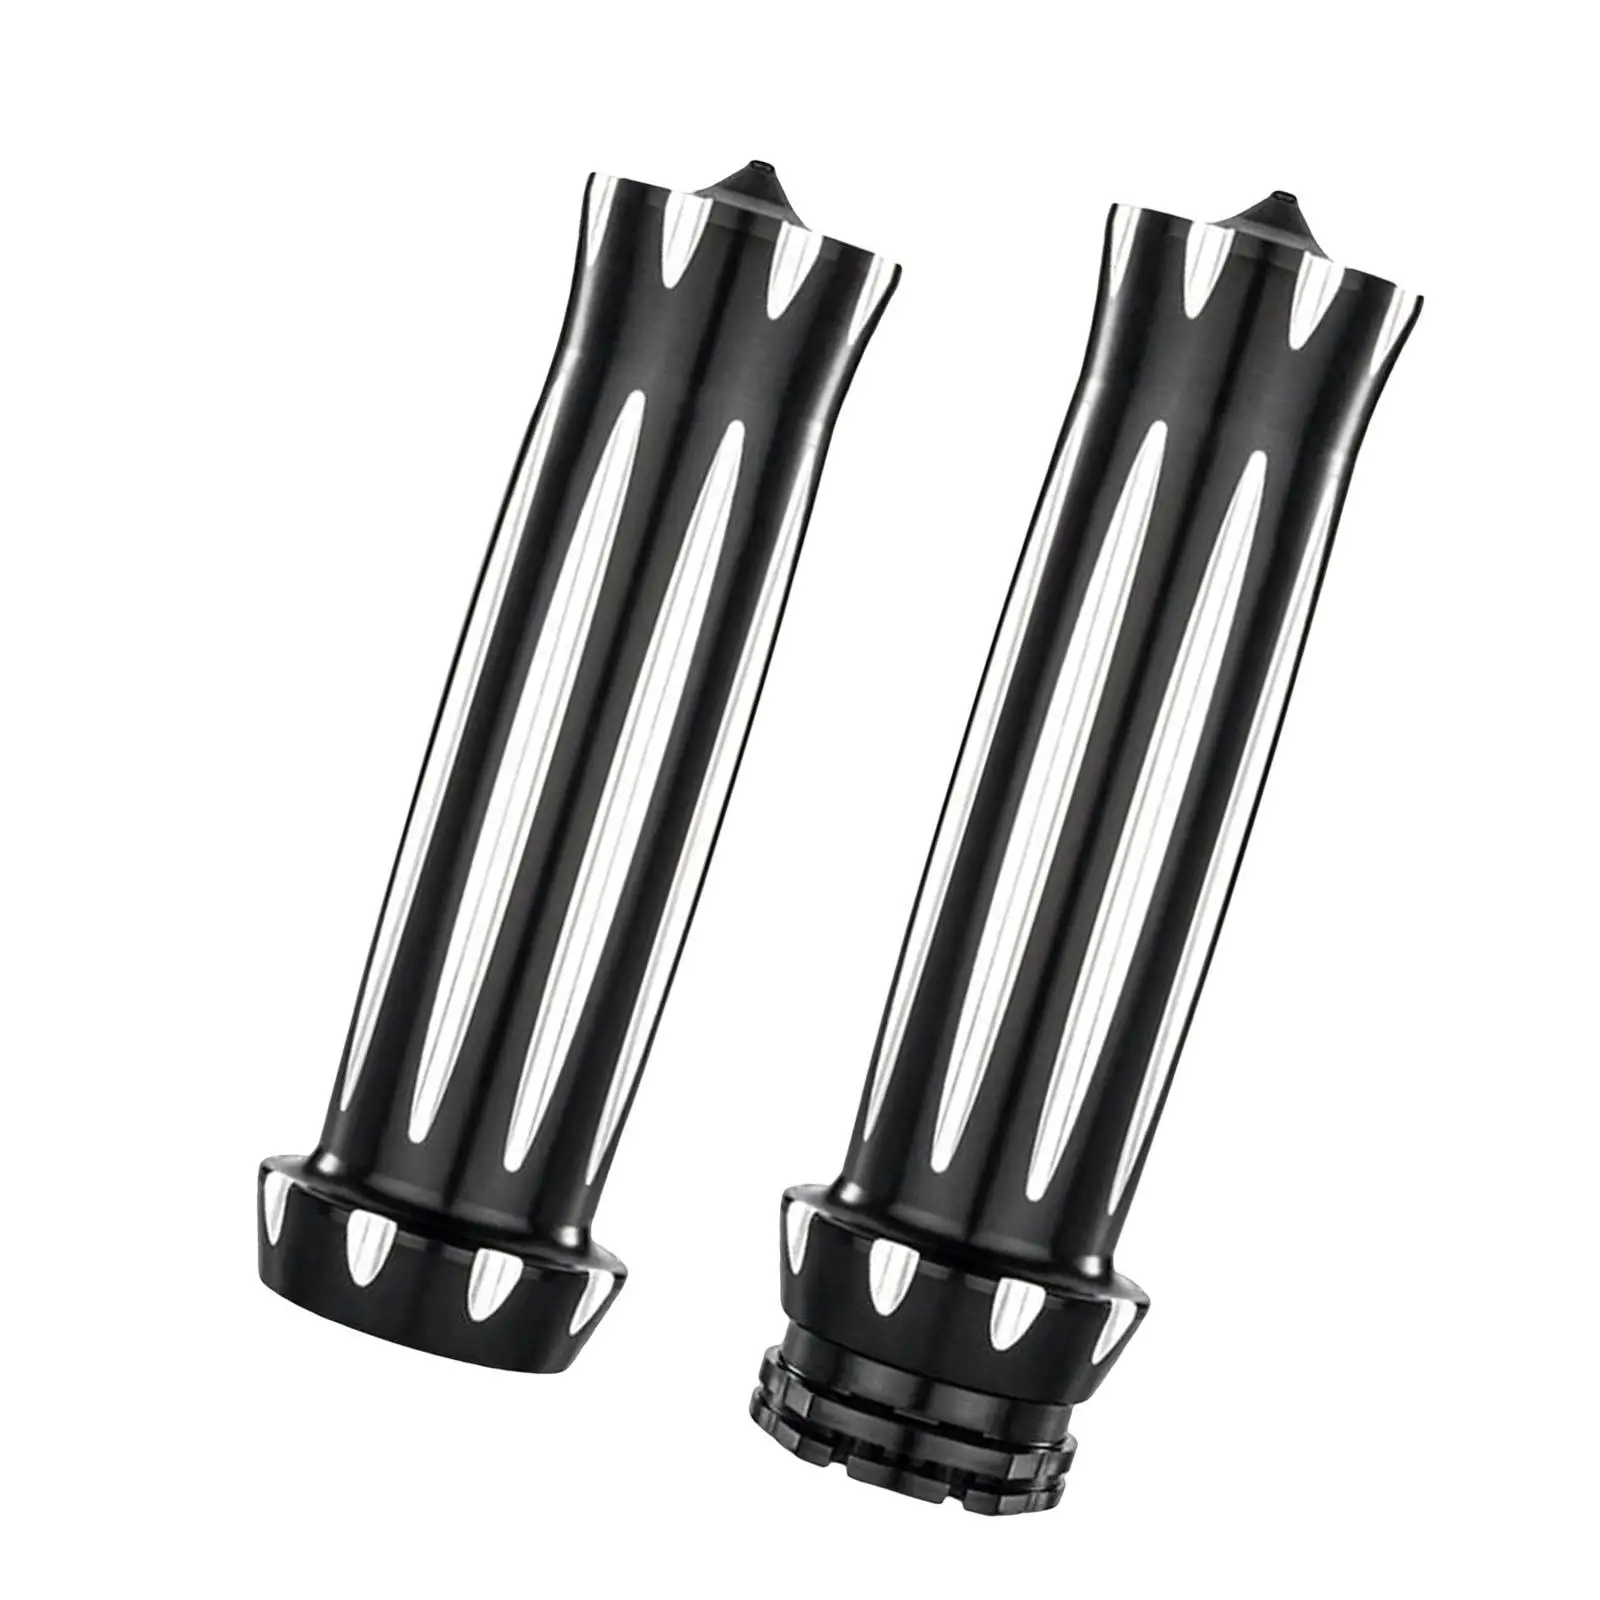 2 Pieces Motorcycle Handlebar Grips for 25mm 1 inch Non Slip Fit for 